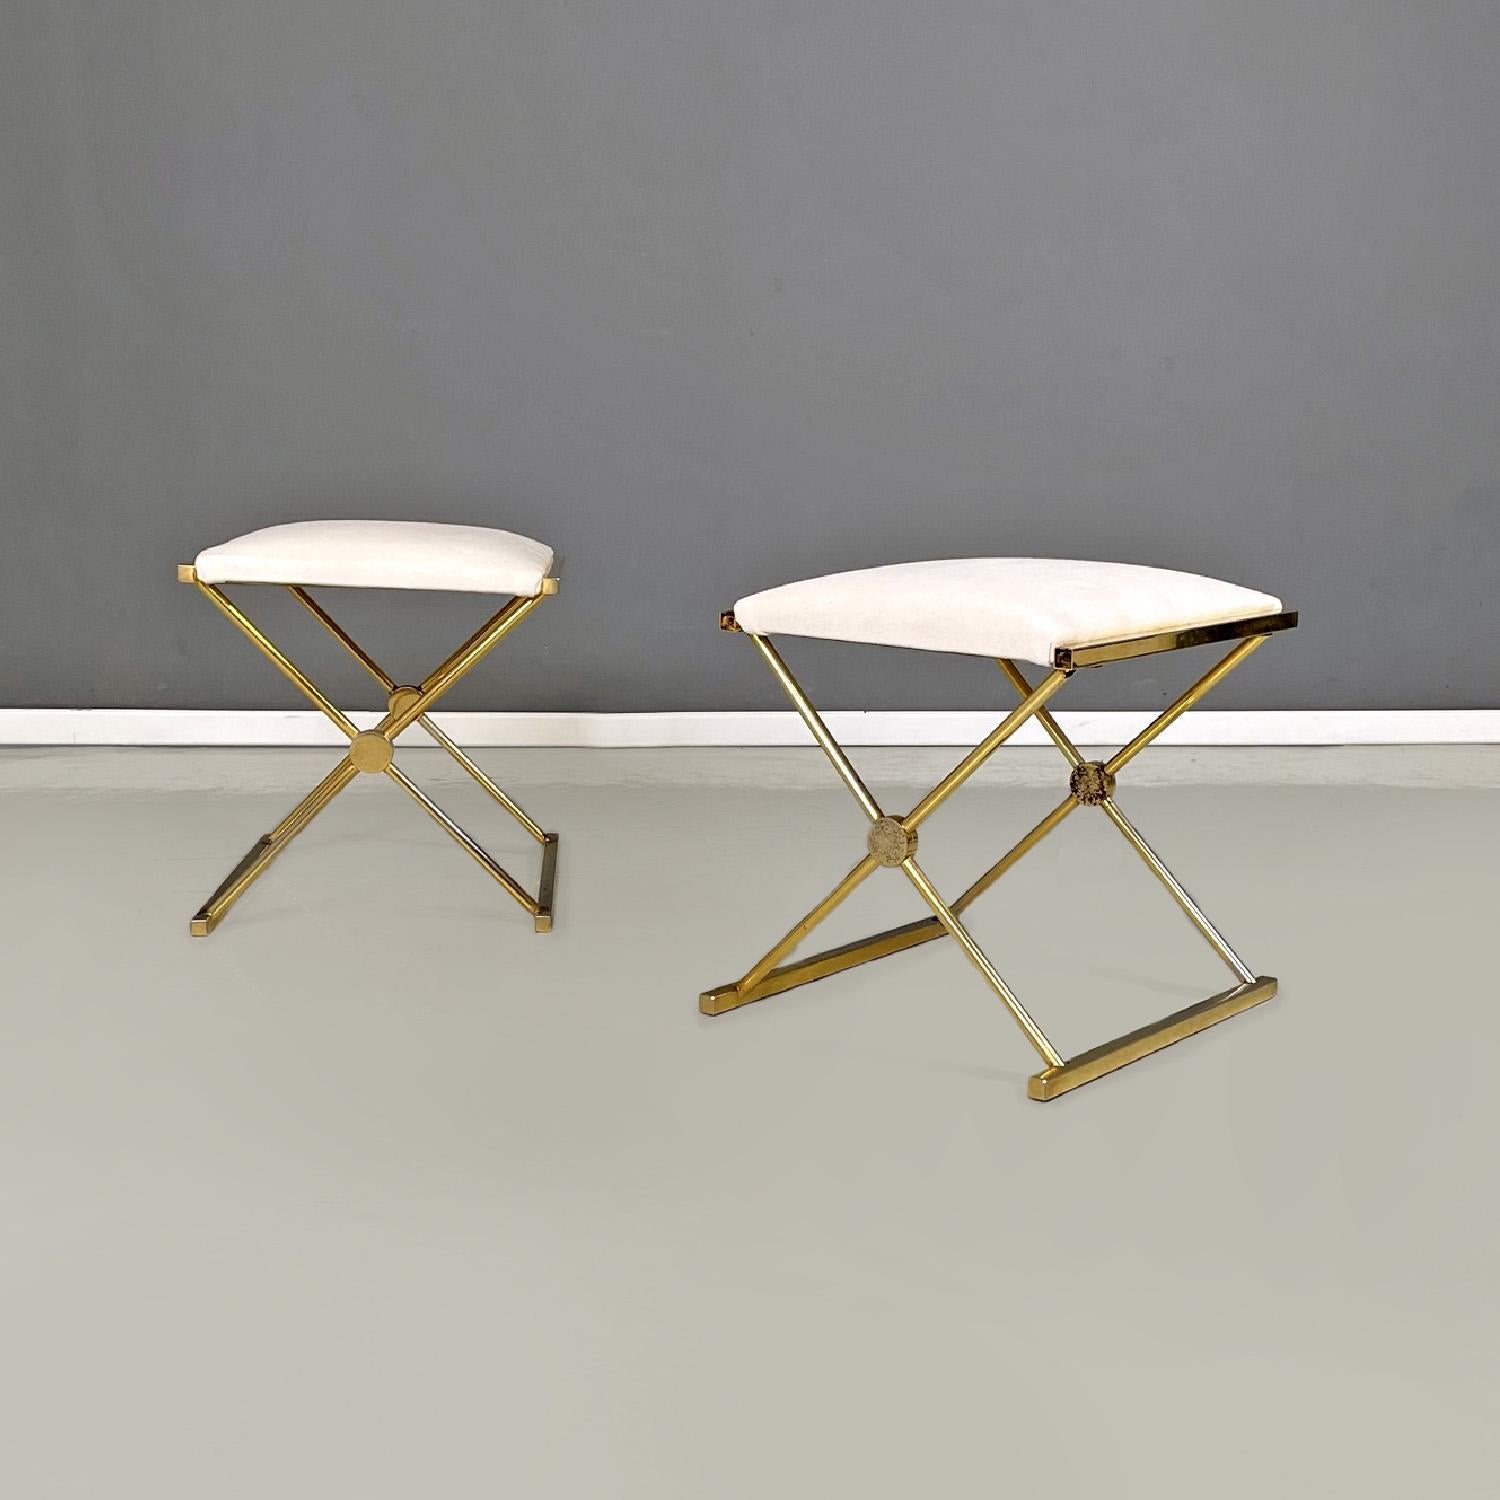 Italian modern stools in golden metal and white fabric, 1980s
Set of four stools with padded rectangular seat covered in white fabric. The structure, in metal with a golden finish, crosses on two sides to form the legs and the floor